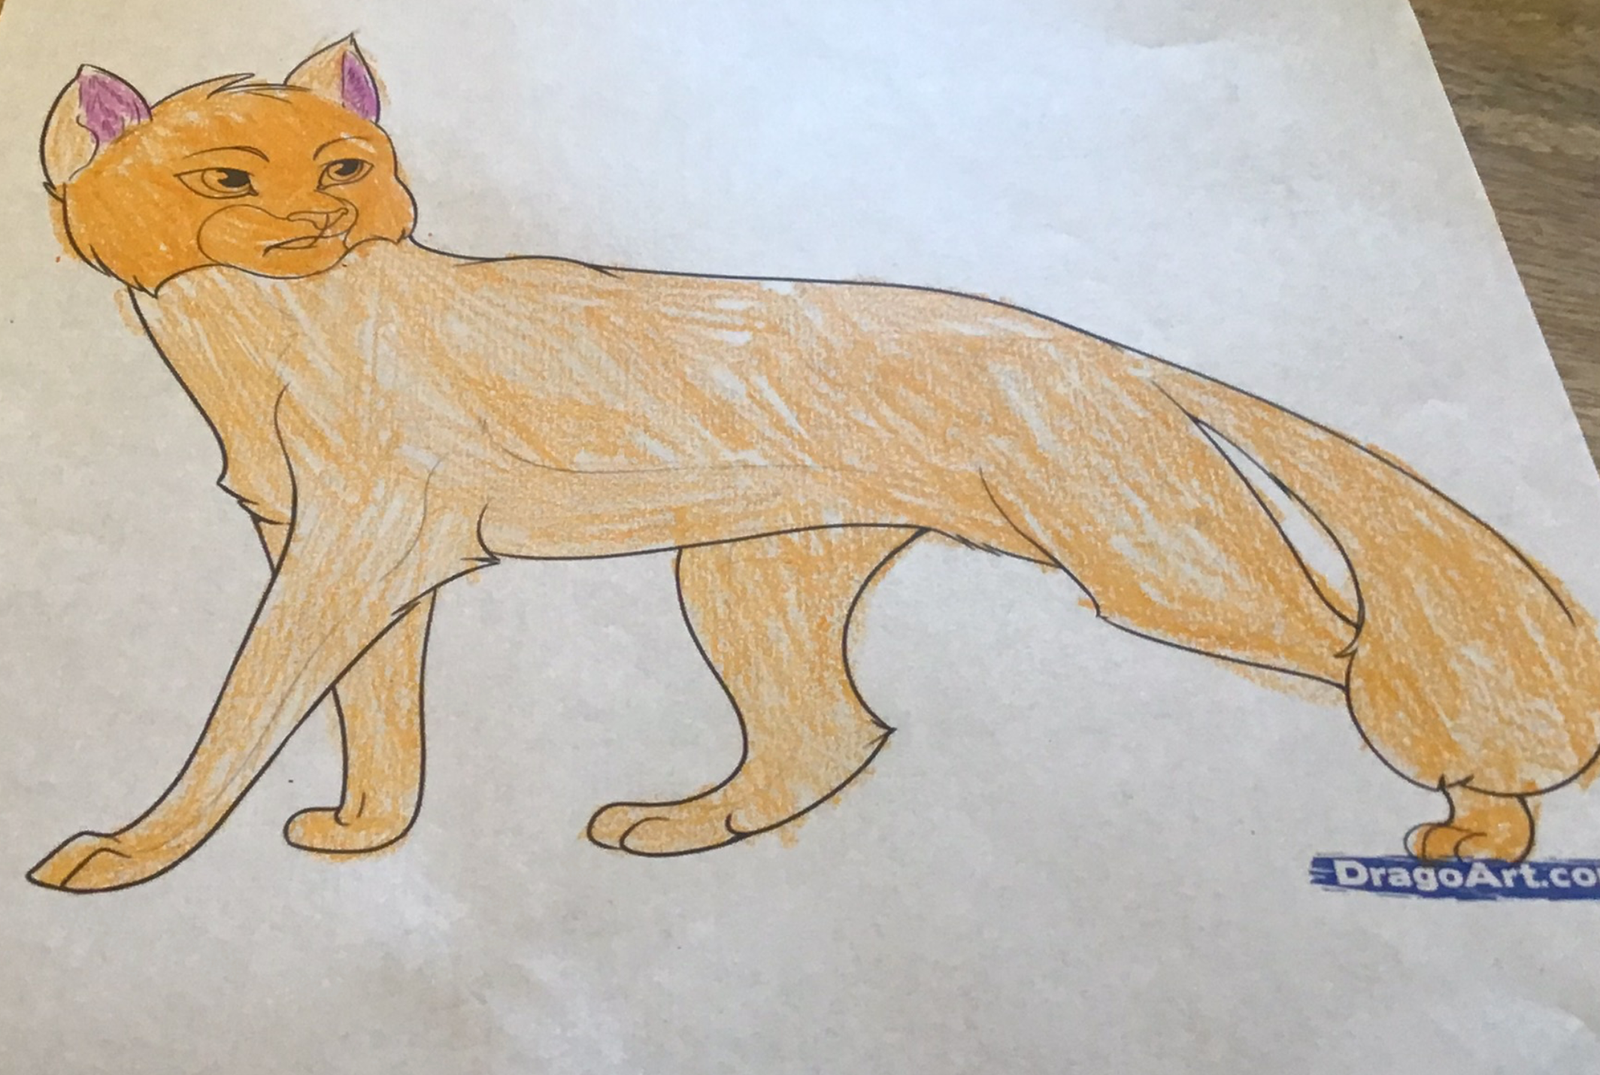 WarriorCatsFanBlog – This site is a blog about Warrior cats, a